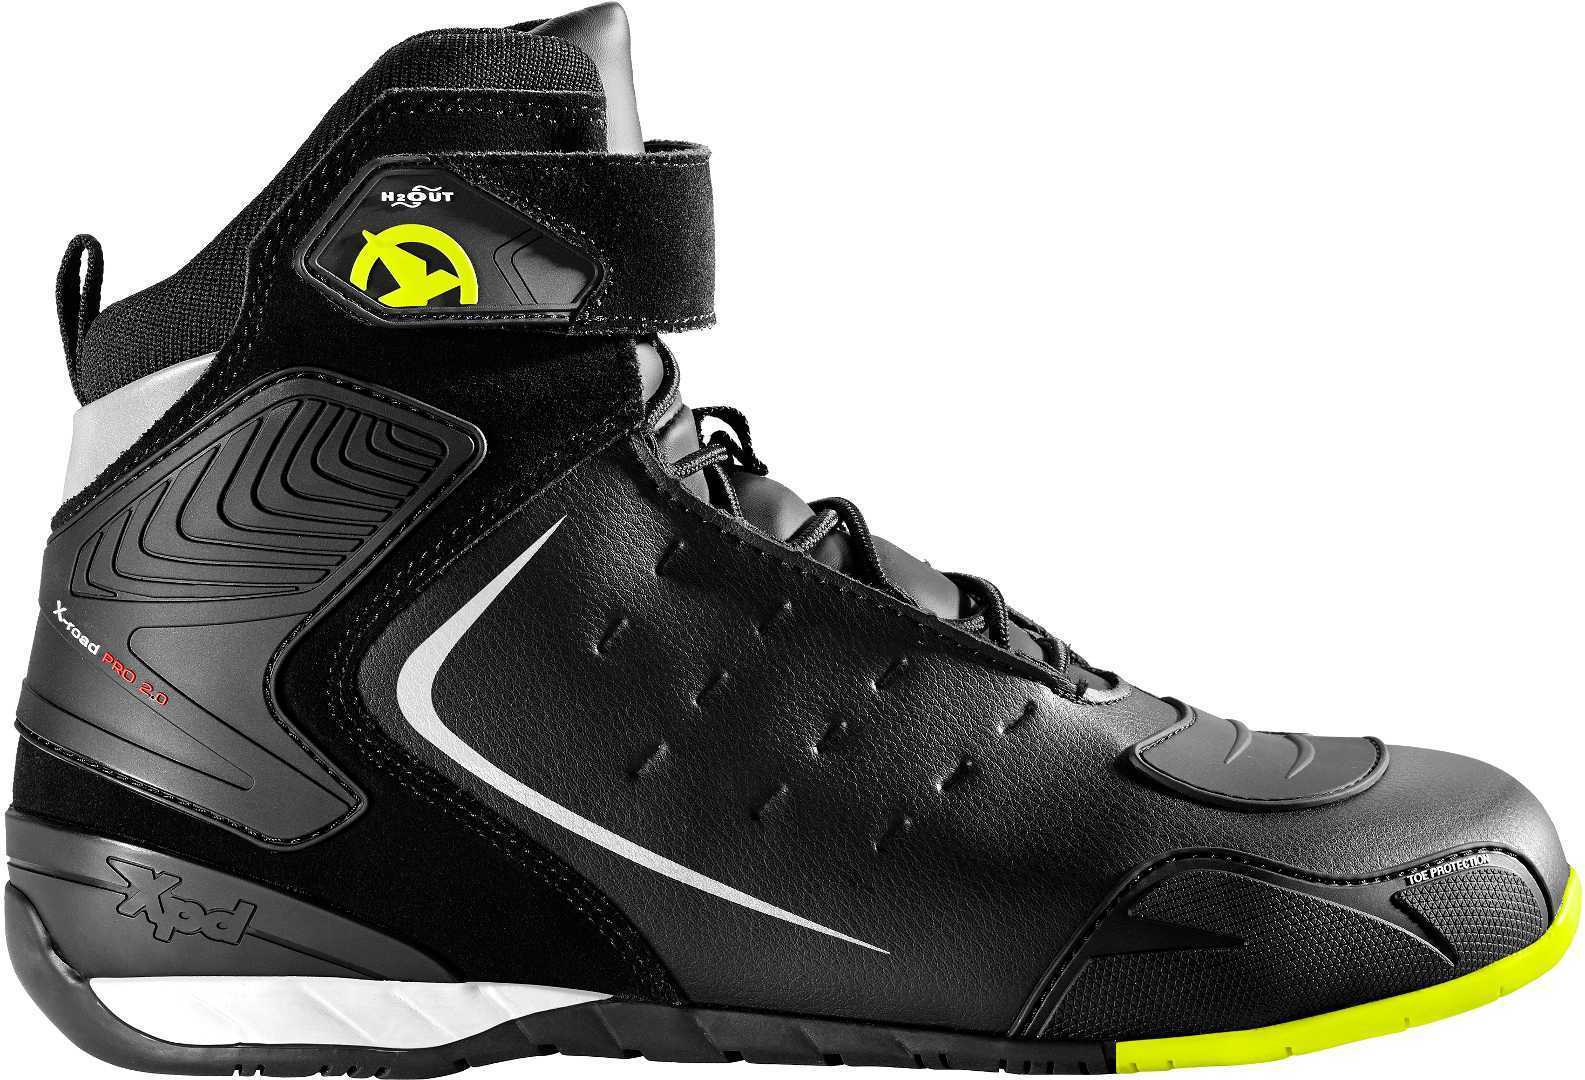 Image of XPD X-Road H2Out Yellow Fluo Size 41 ID 8030161345131